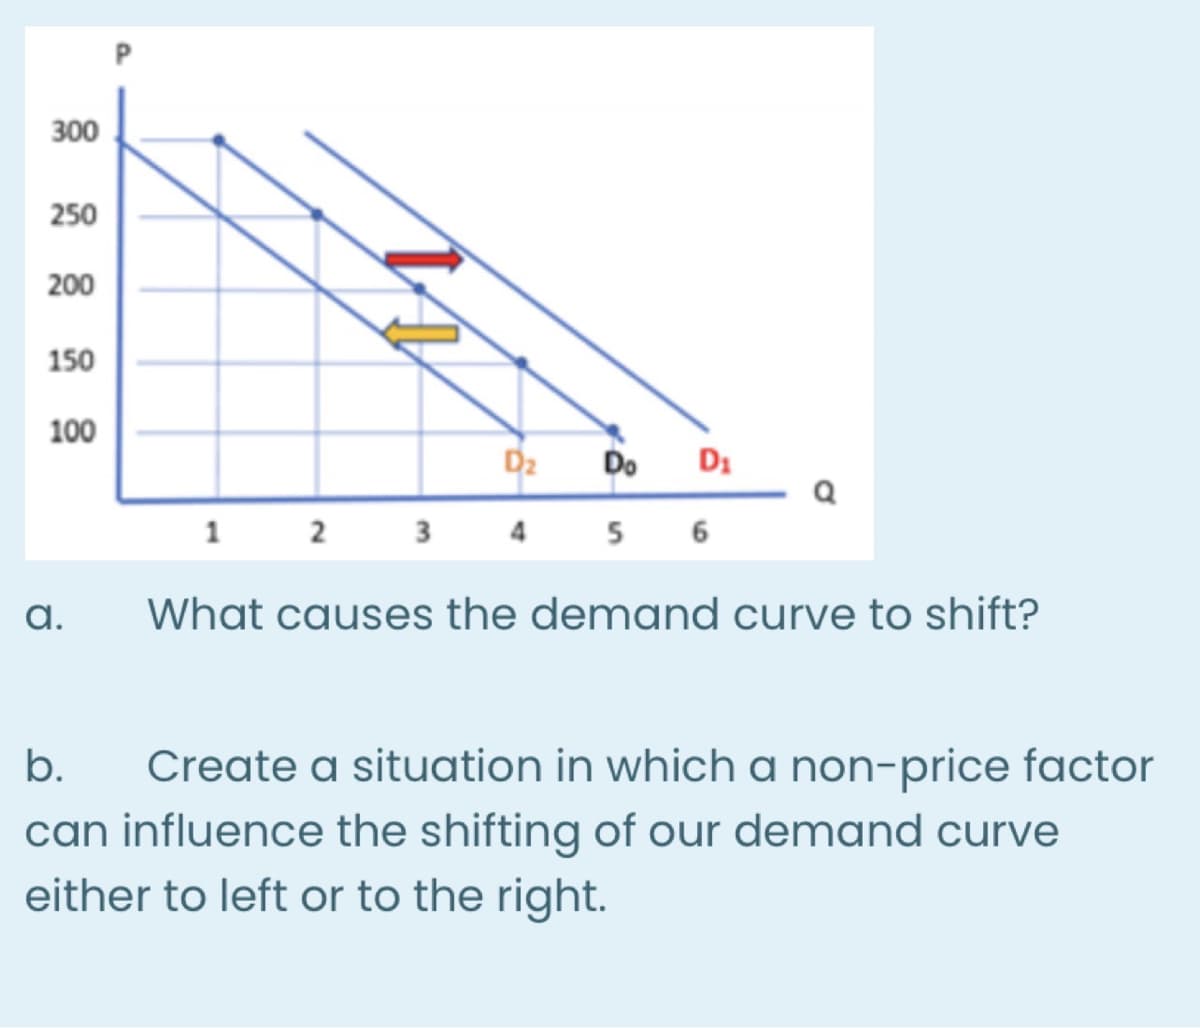 300
250
200
150
100
D2
Do
D1
1
2 3
4
5 6
a.
What causes the demand curve to shift?
b.
Create a situation in which a non-price factor
can influence the shifting of our demand curve
either to left or to the right.
